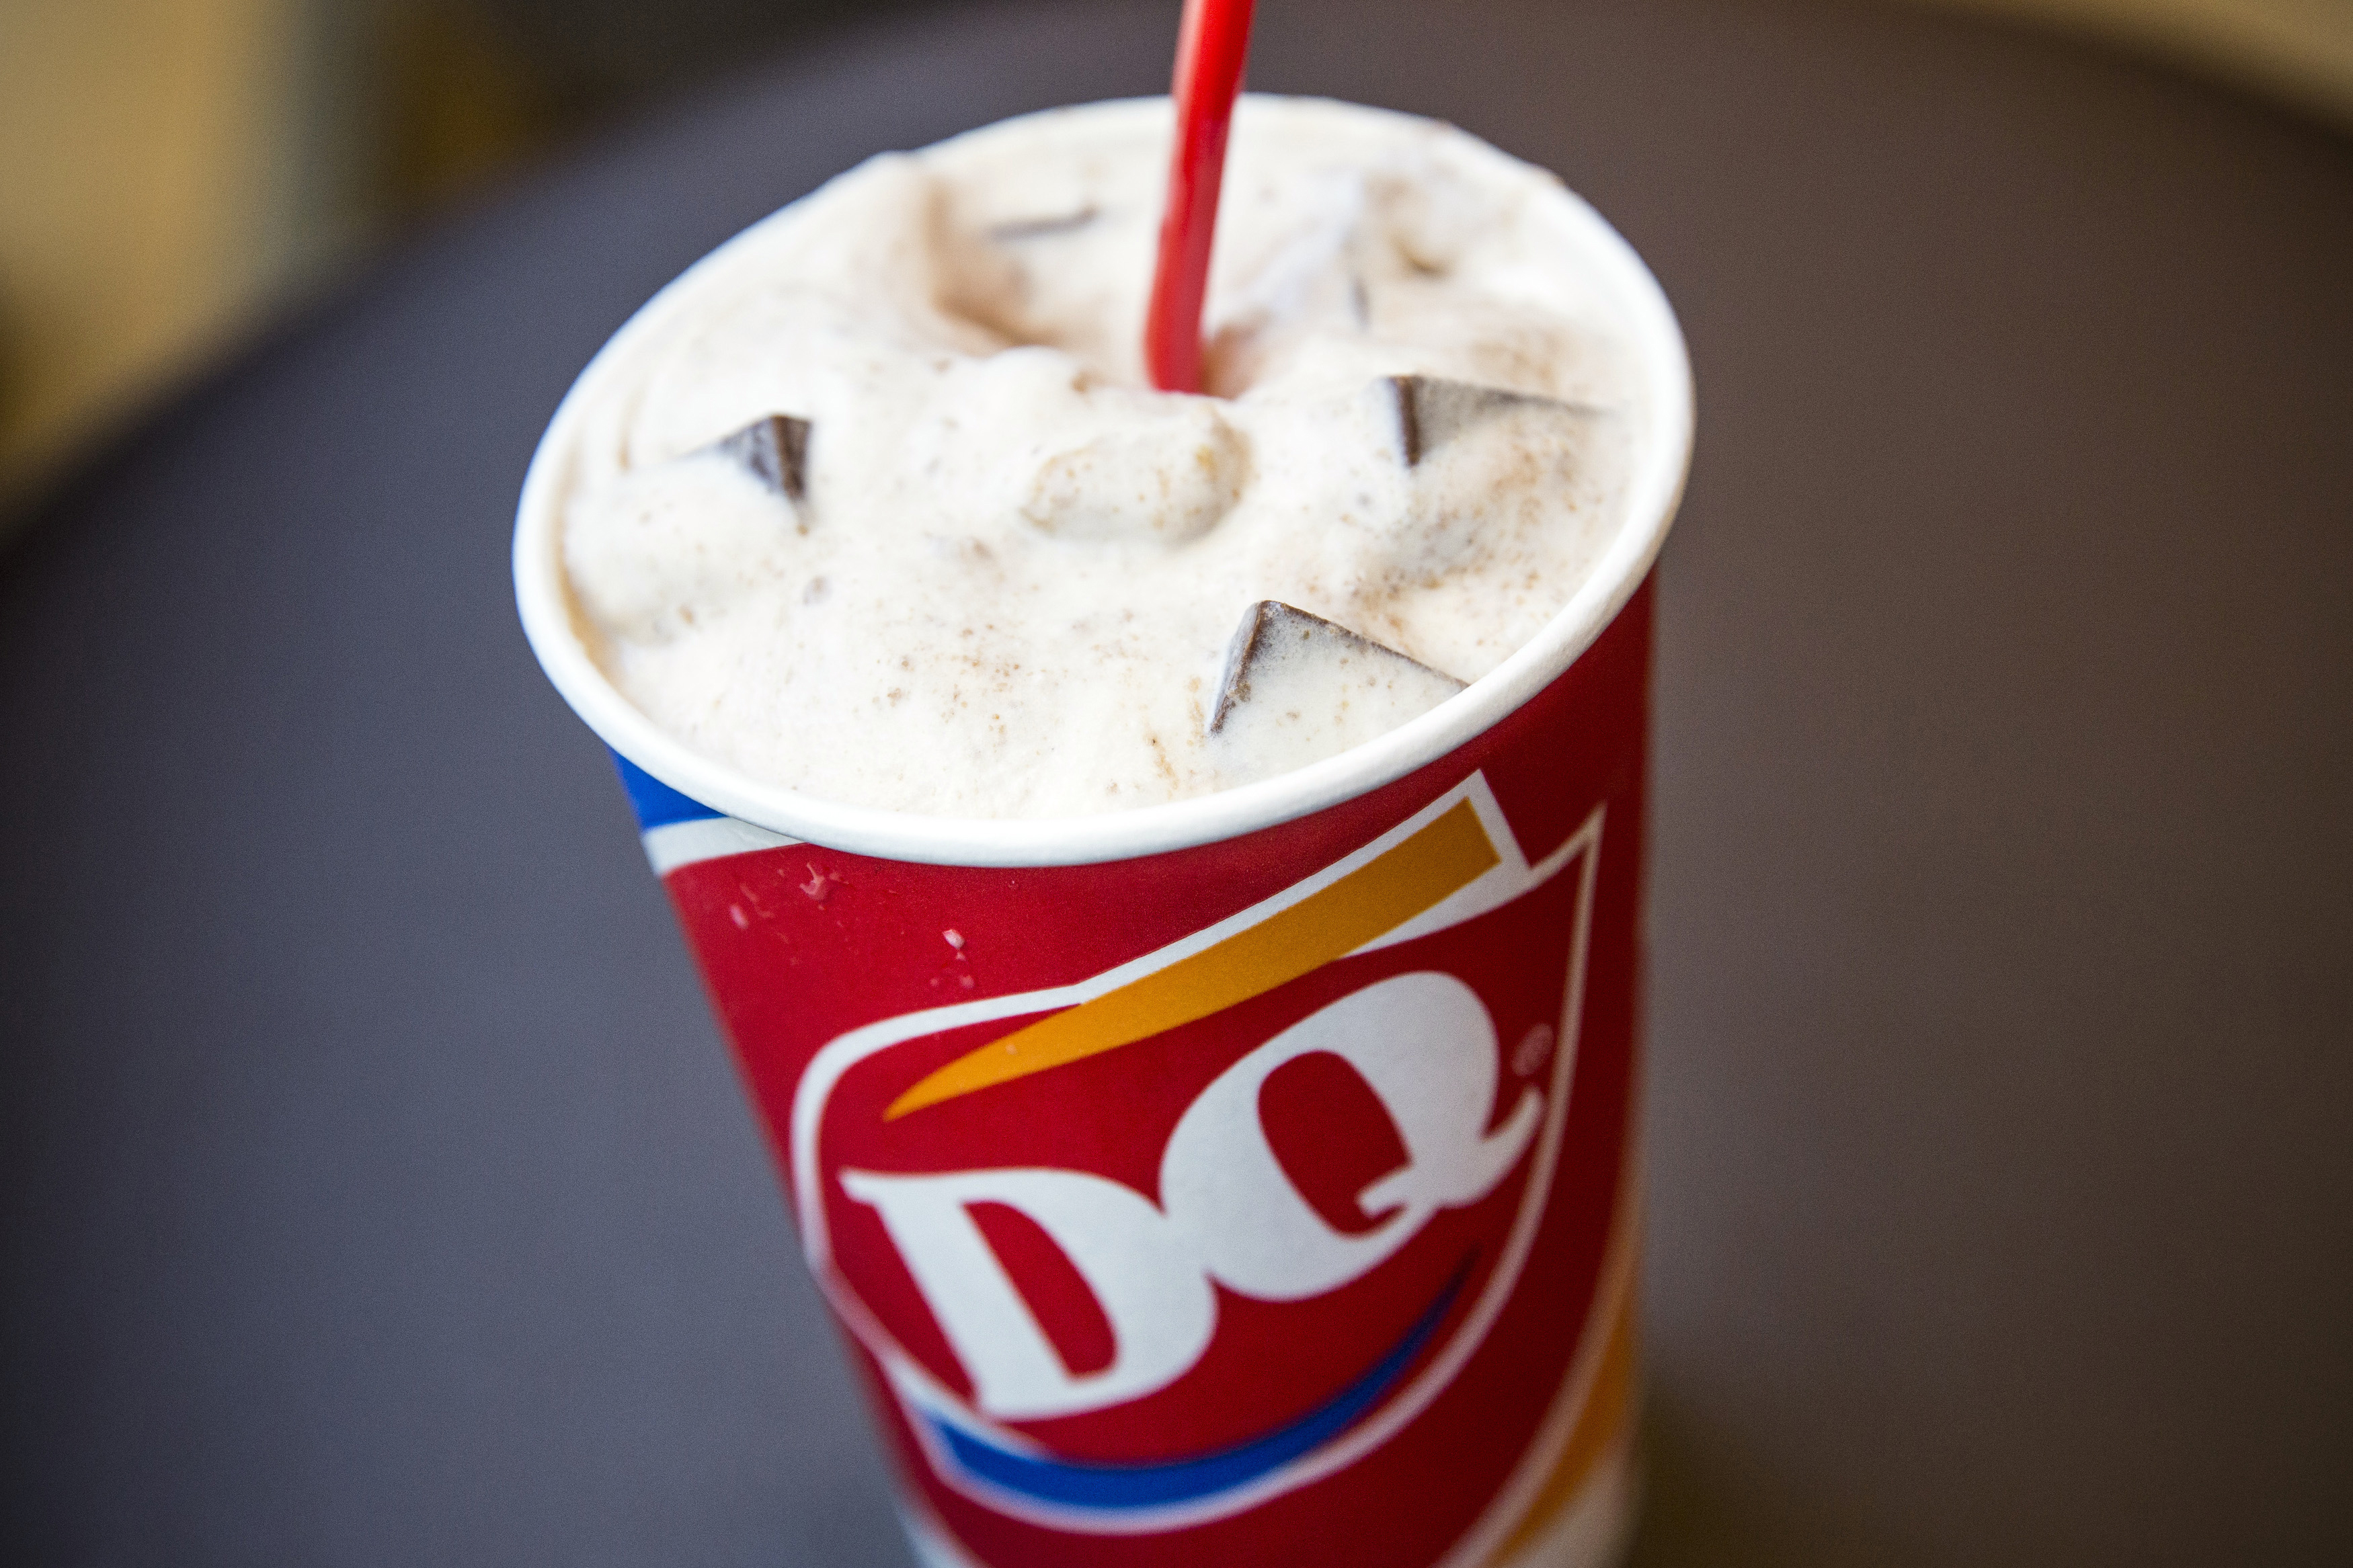 A S'mores flavored blizzard is seen at a Dairy Queen